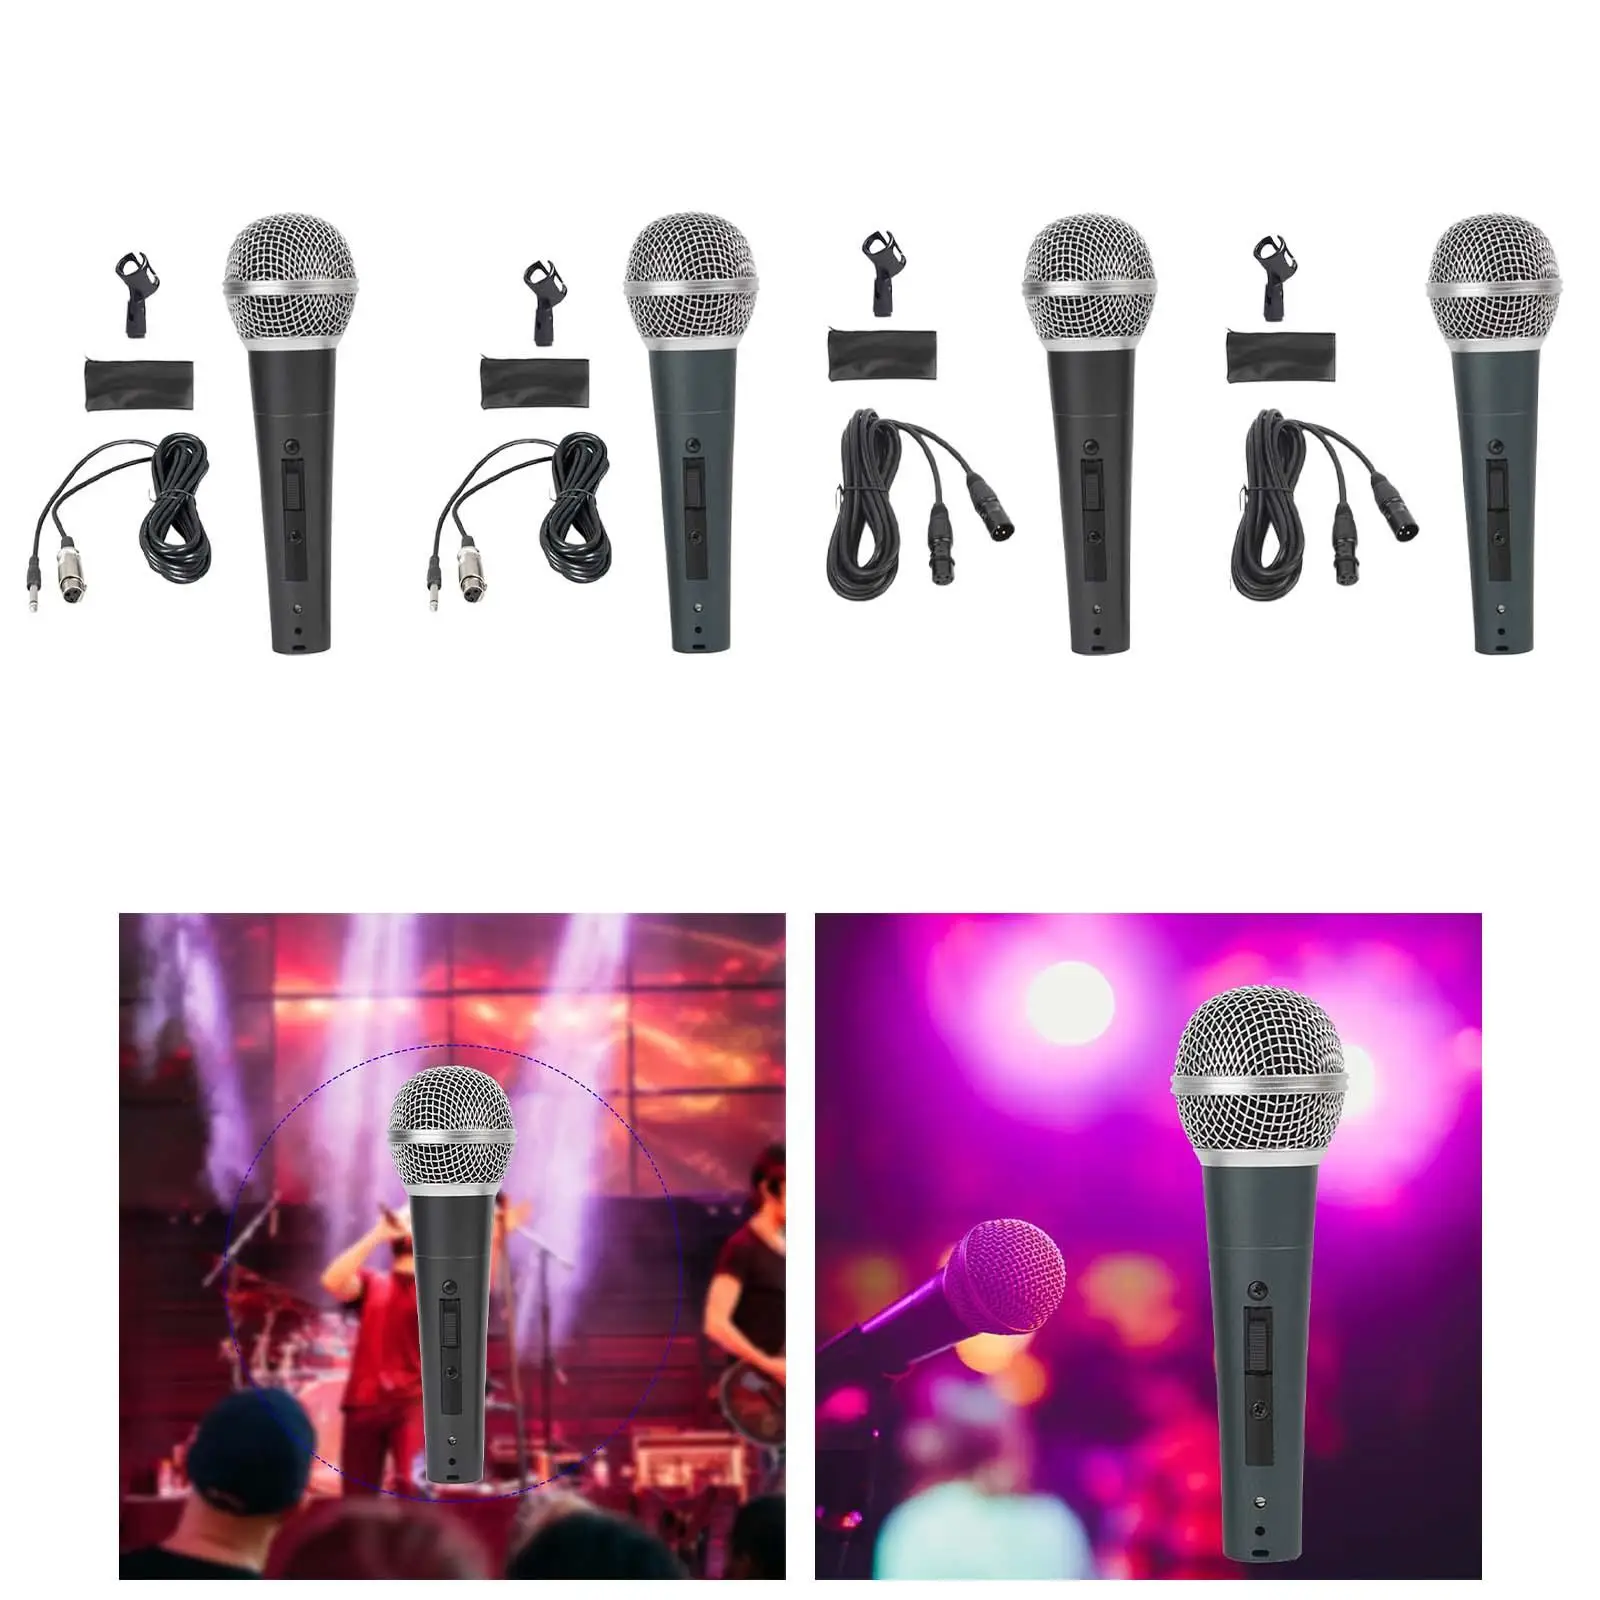 Wired Microphone XLR Detachable Cable with on and Off Switch Long Range Dynamic Cardioid Microphone for Home KTV Speech Wedding